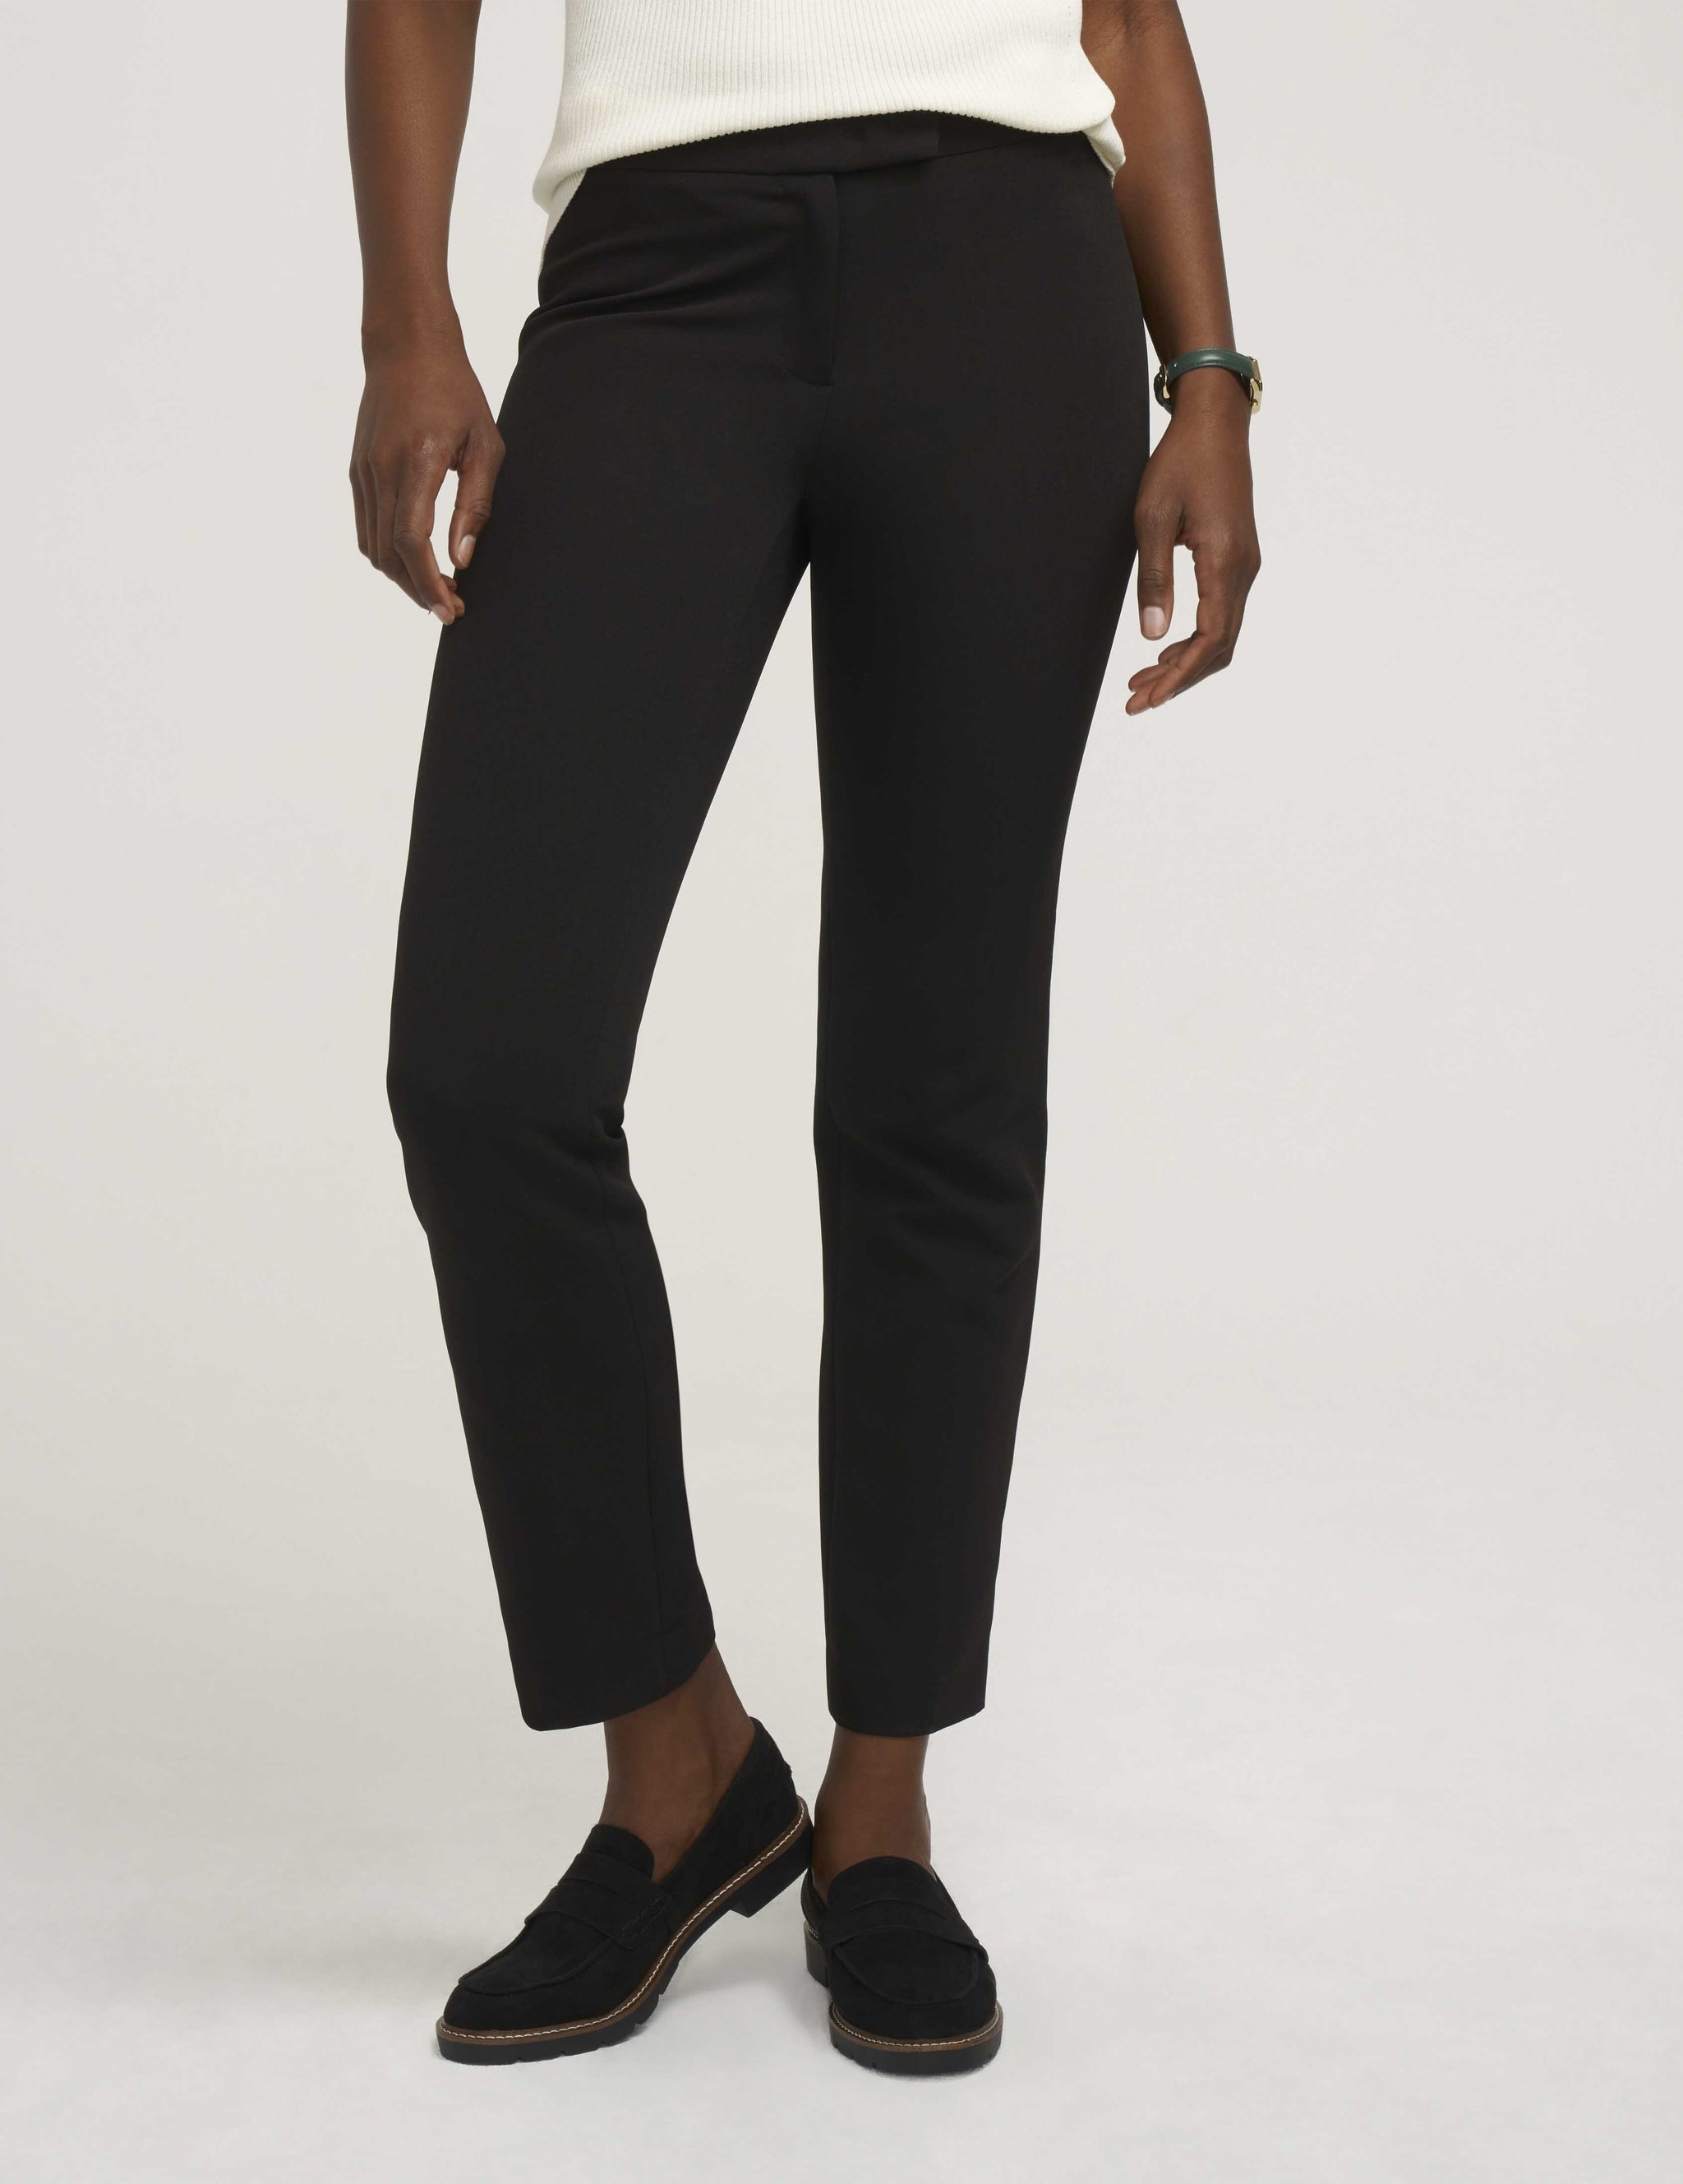 Shop Plus Size Formal Pants for Women Online | The Pink Moon